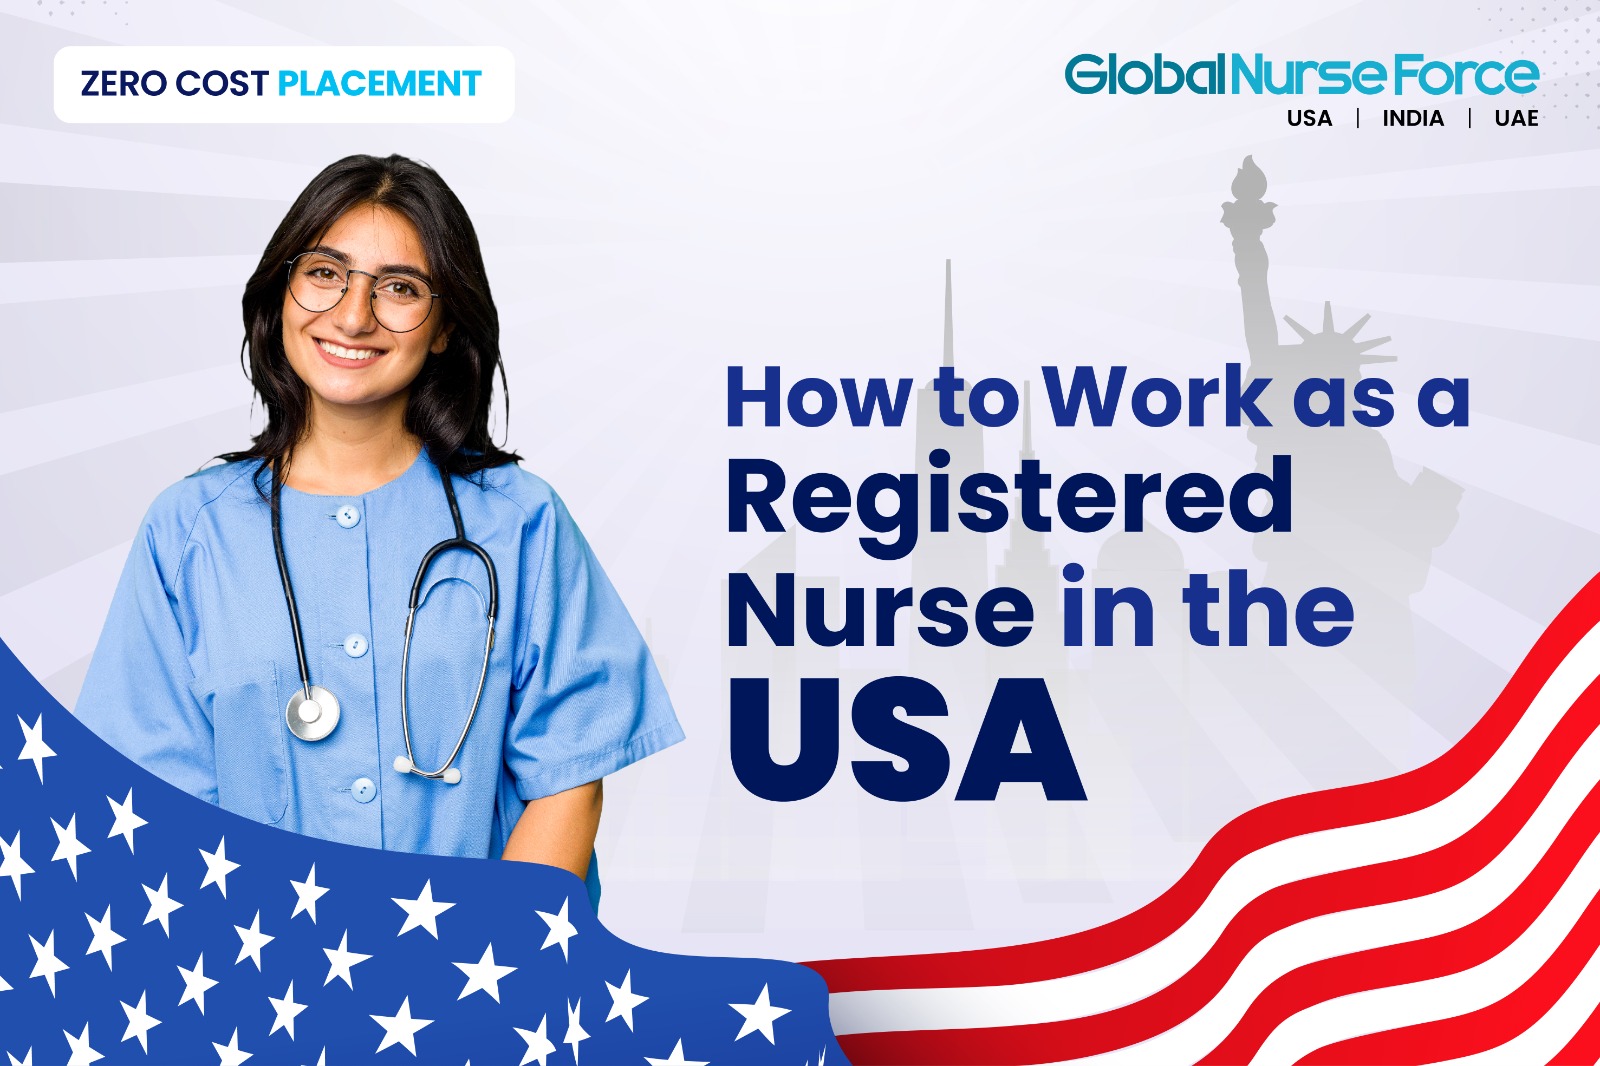 How to Work as a Registered Nurse in the USA